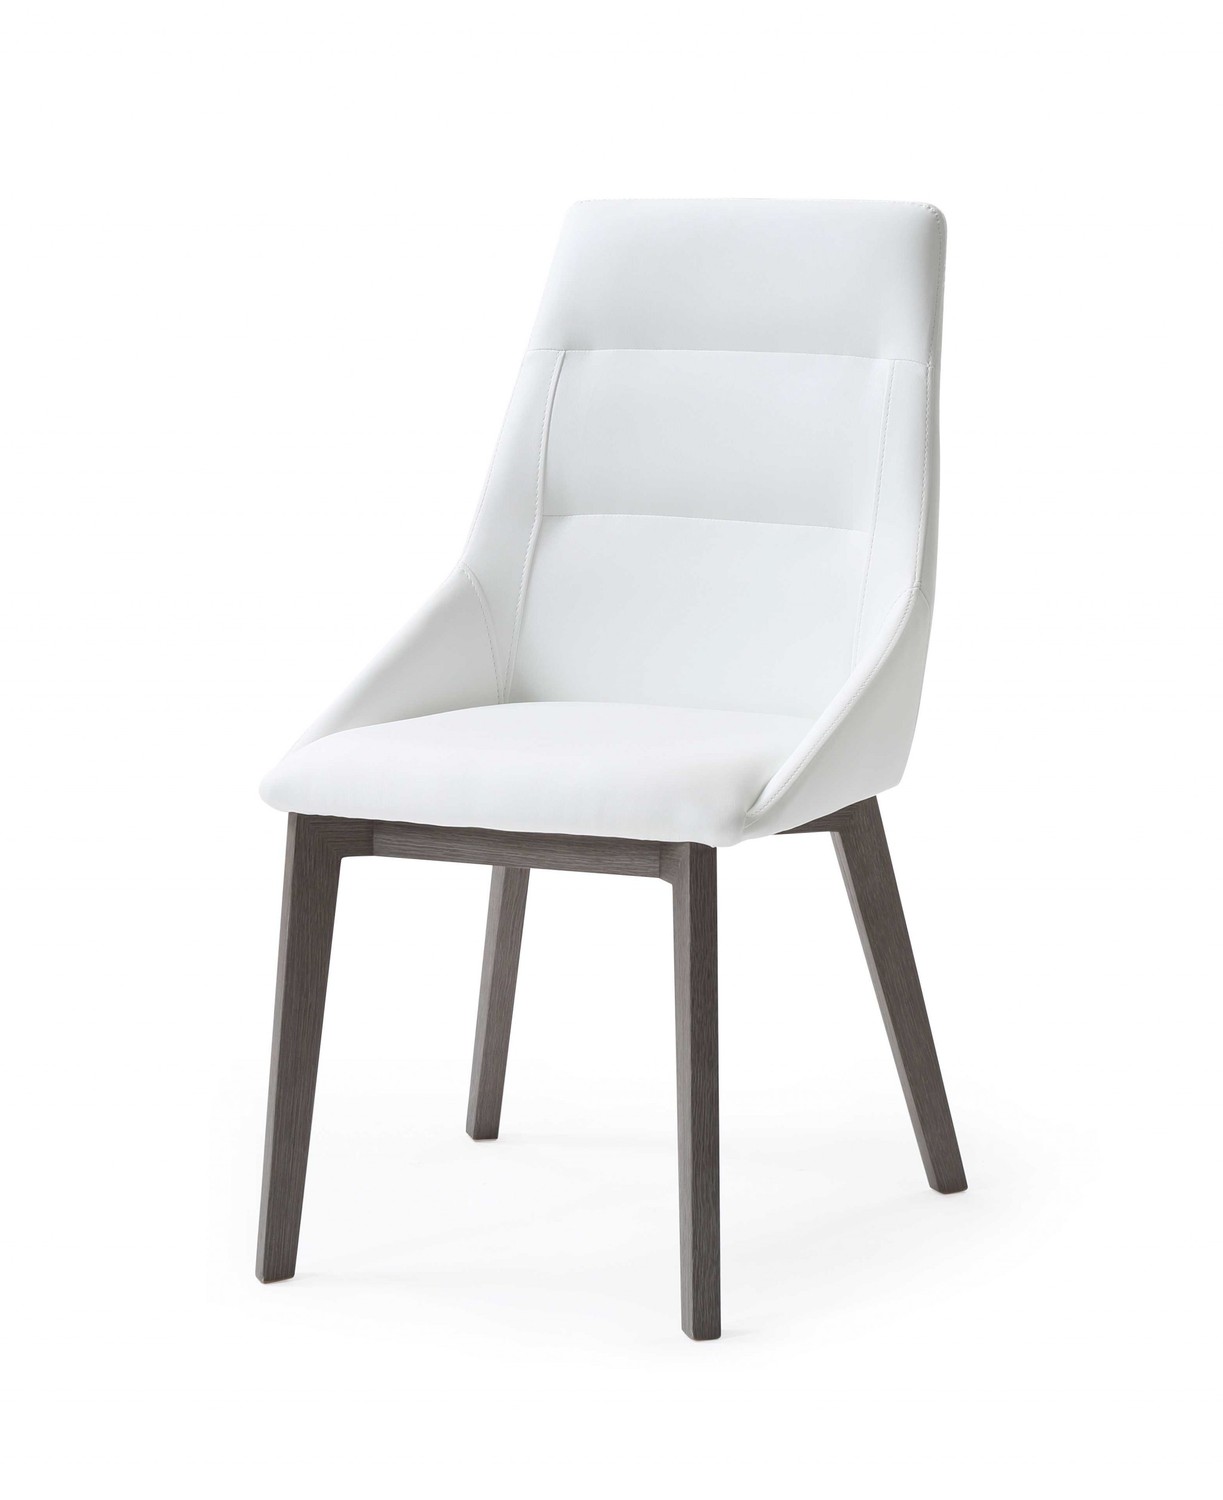 25" X 20" X 35" White Faux Leather or Metal Dining Chair